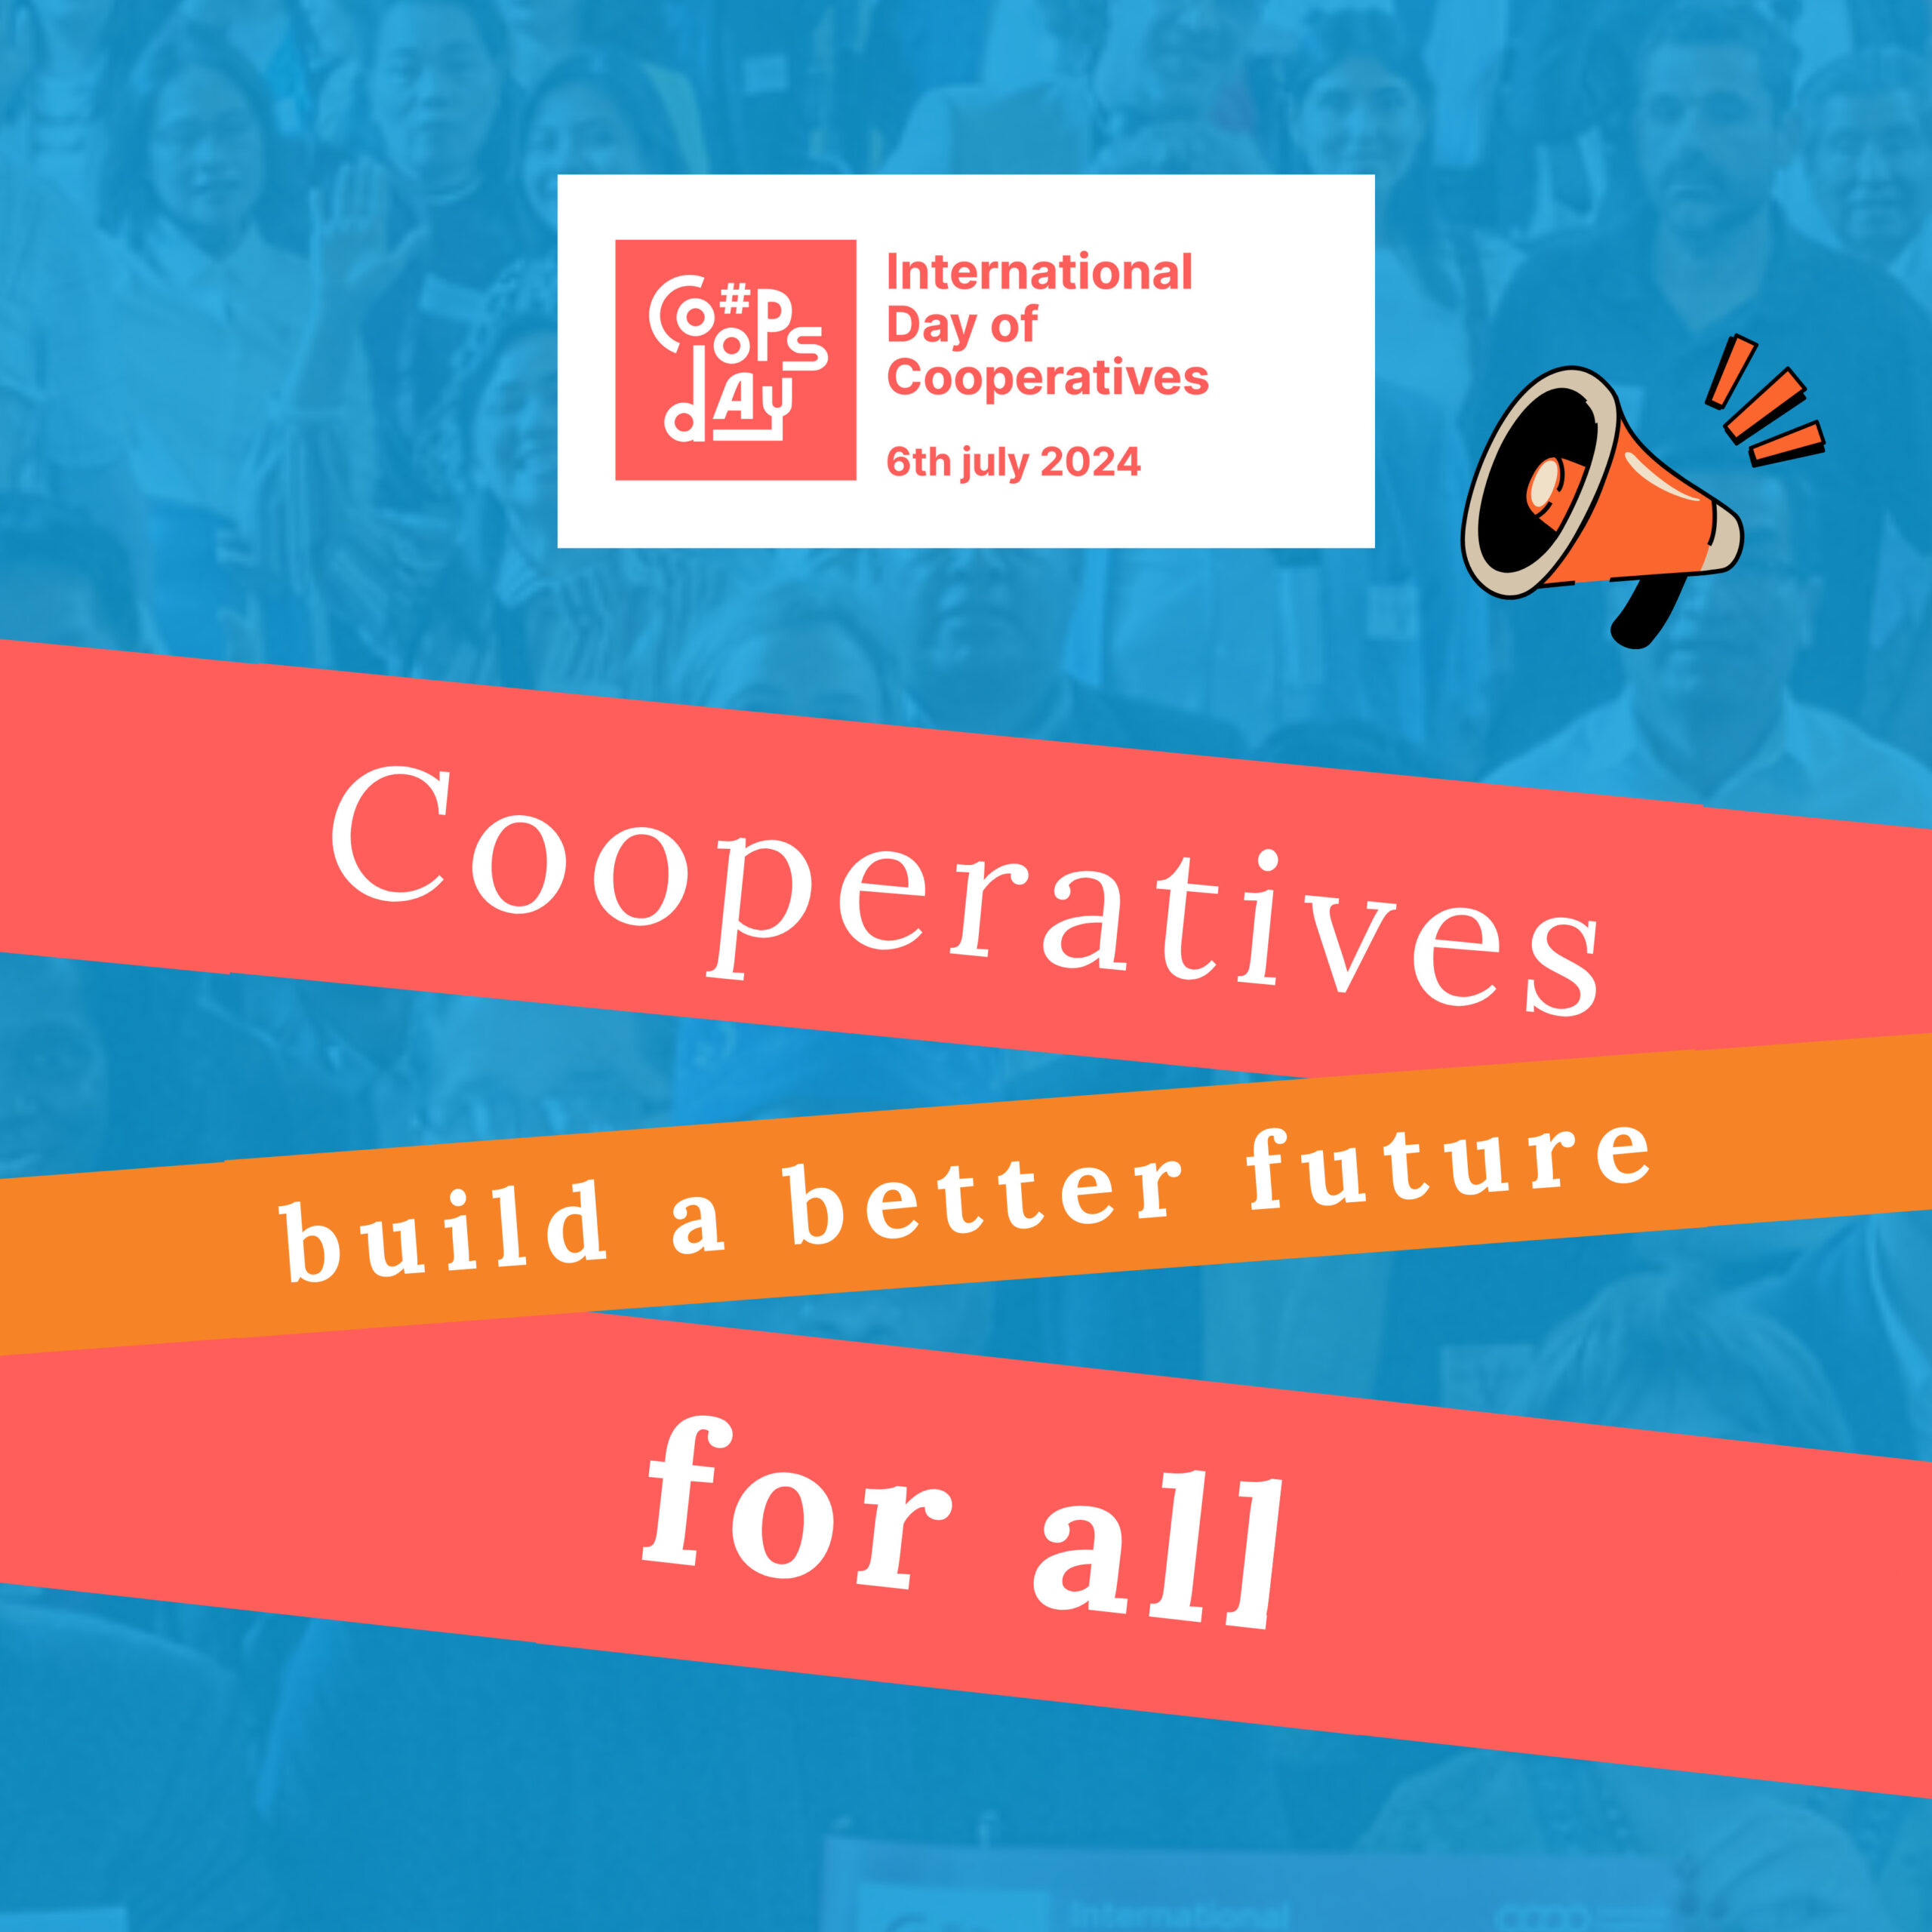 BEDC Celebrates International Cooperative Day, Highlighting Cooperative Action for Climate and Community